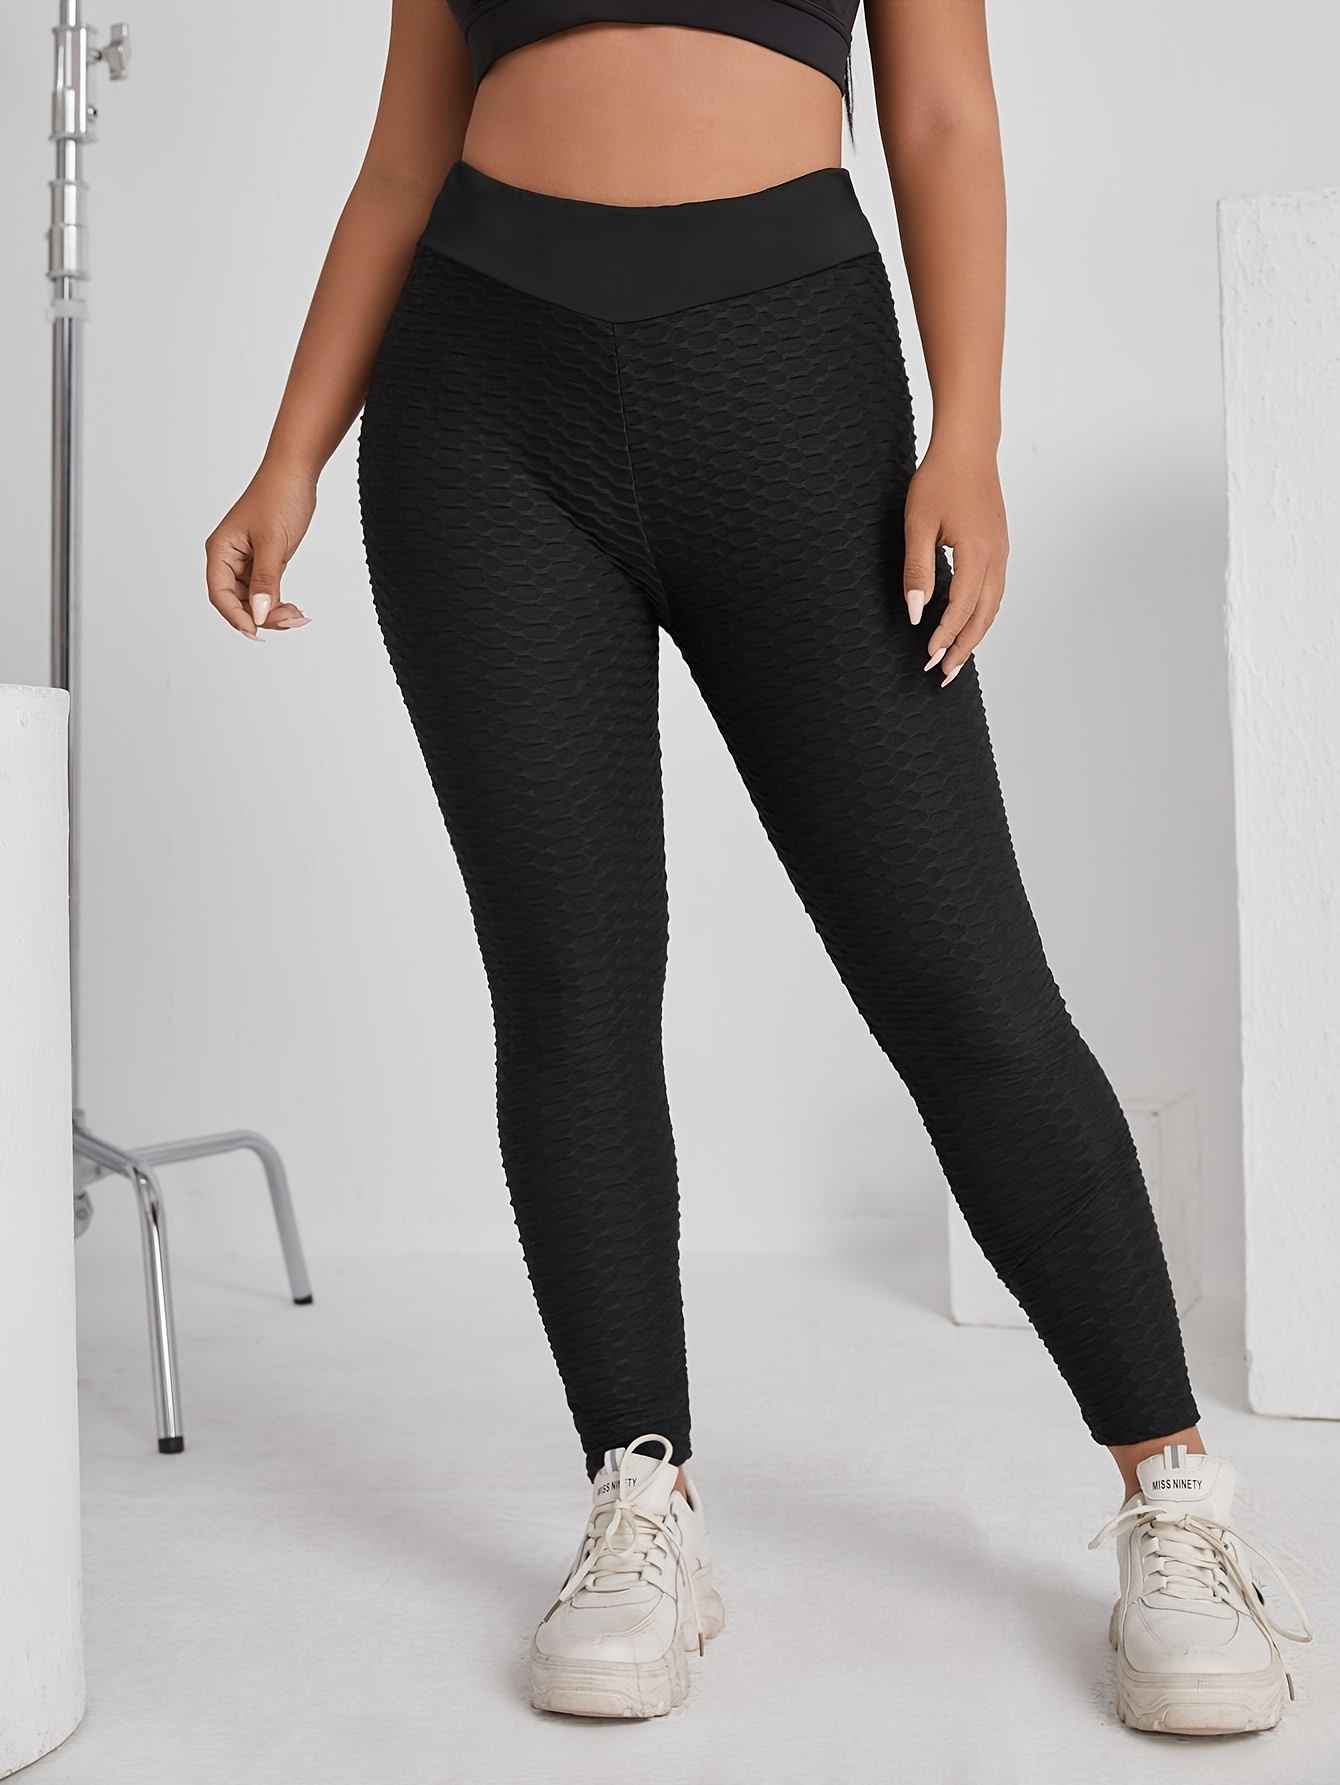 Plus Size Solid Pocket Leggings, Casual High Waist Stretchy Leggings,  Women's Plus Size Clothing